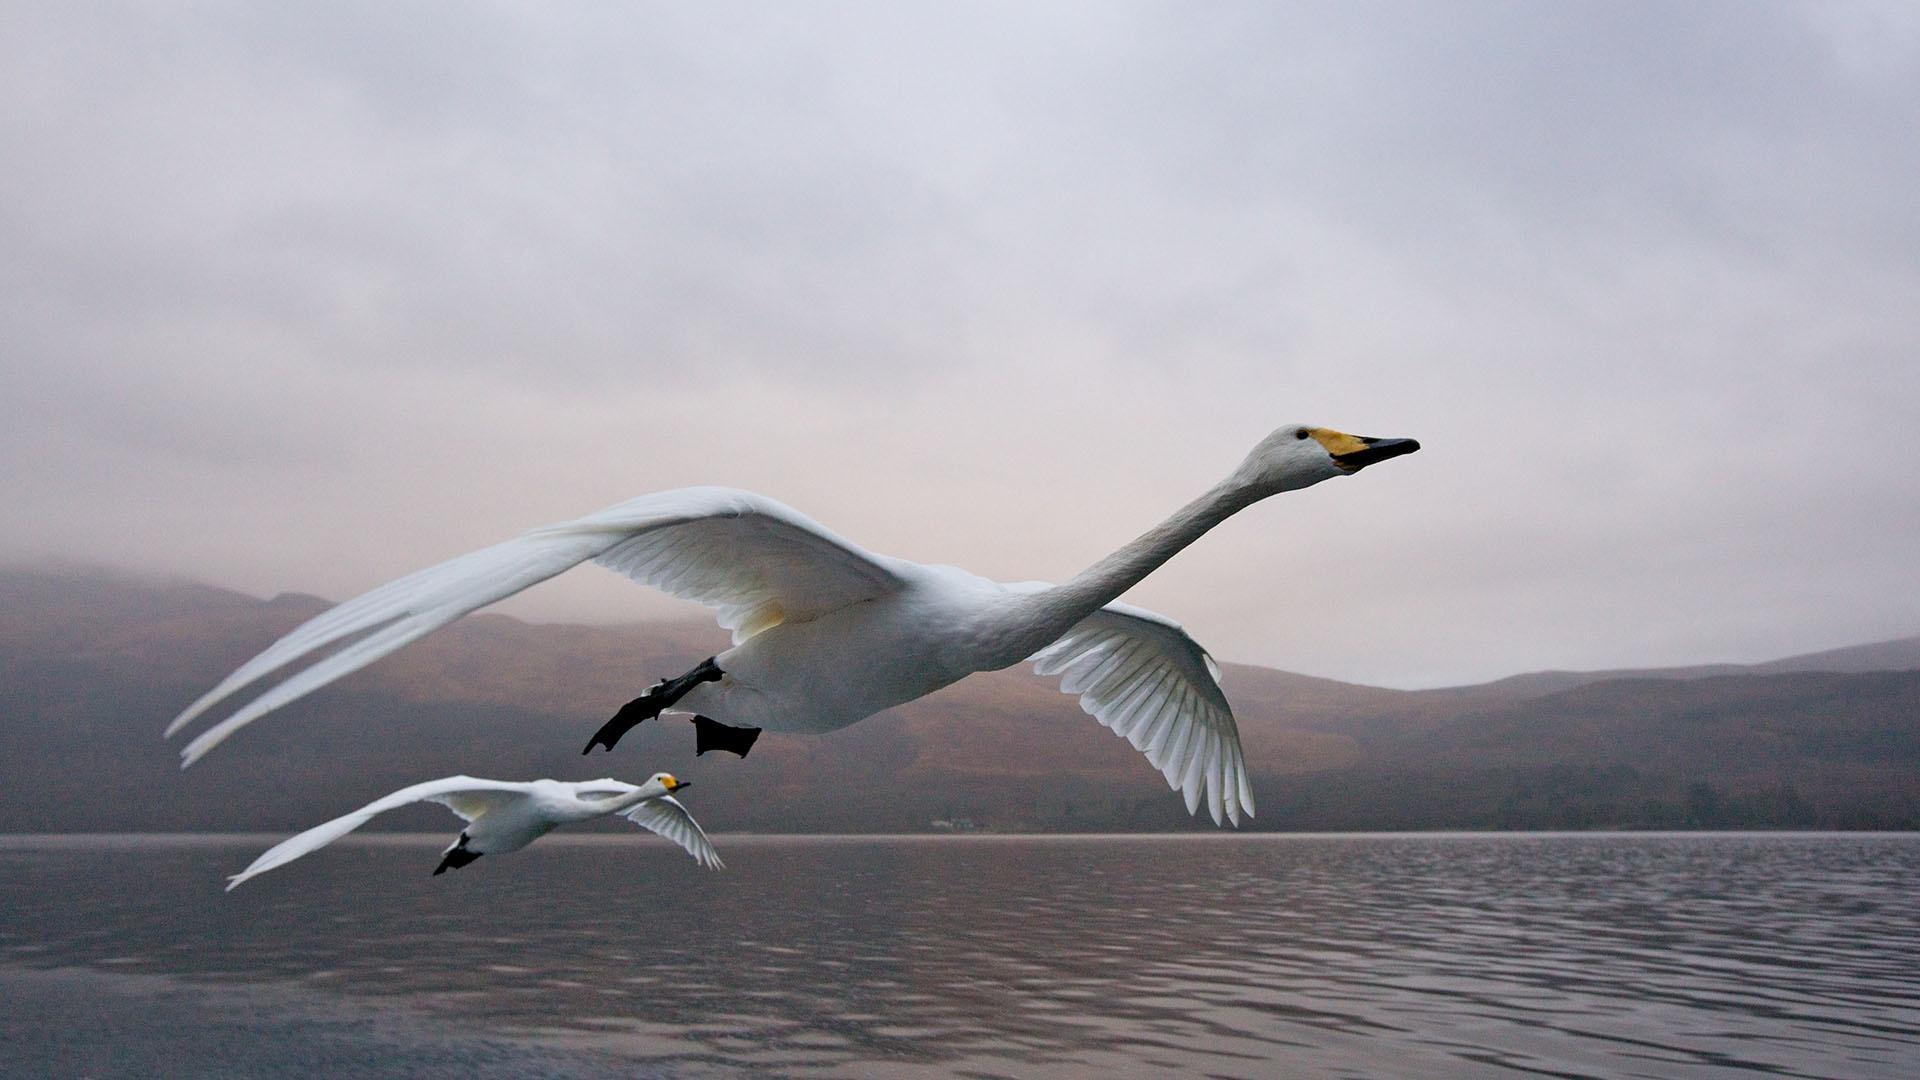 Whooper swans ride the bow wave of rising air behind a speeding boat.